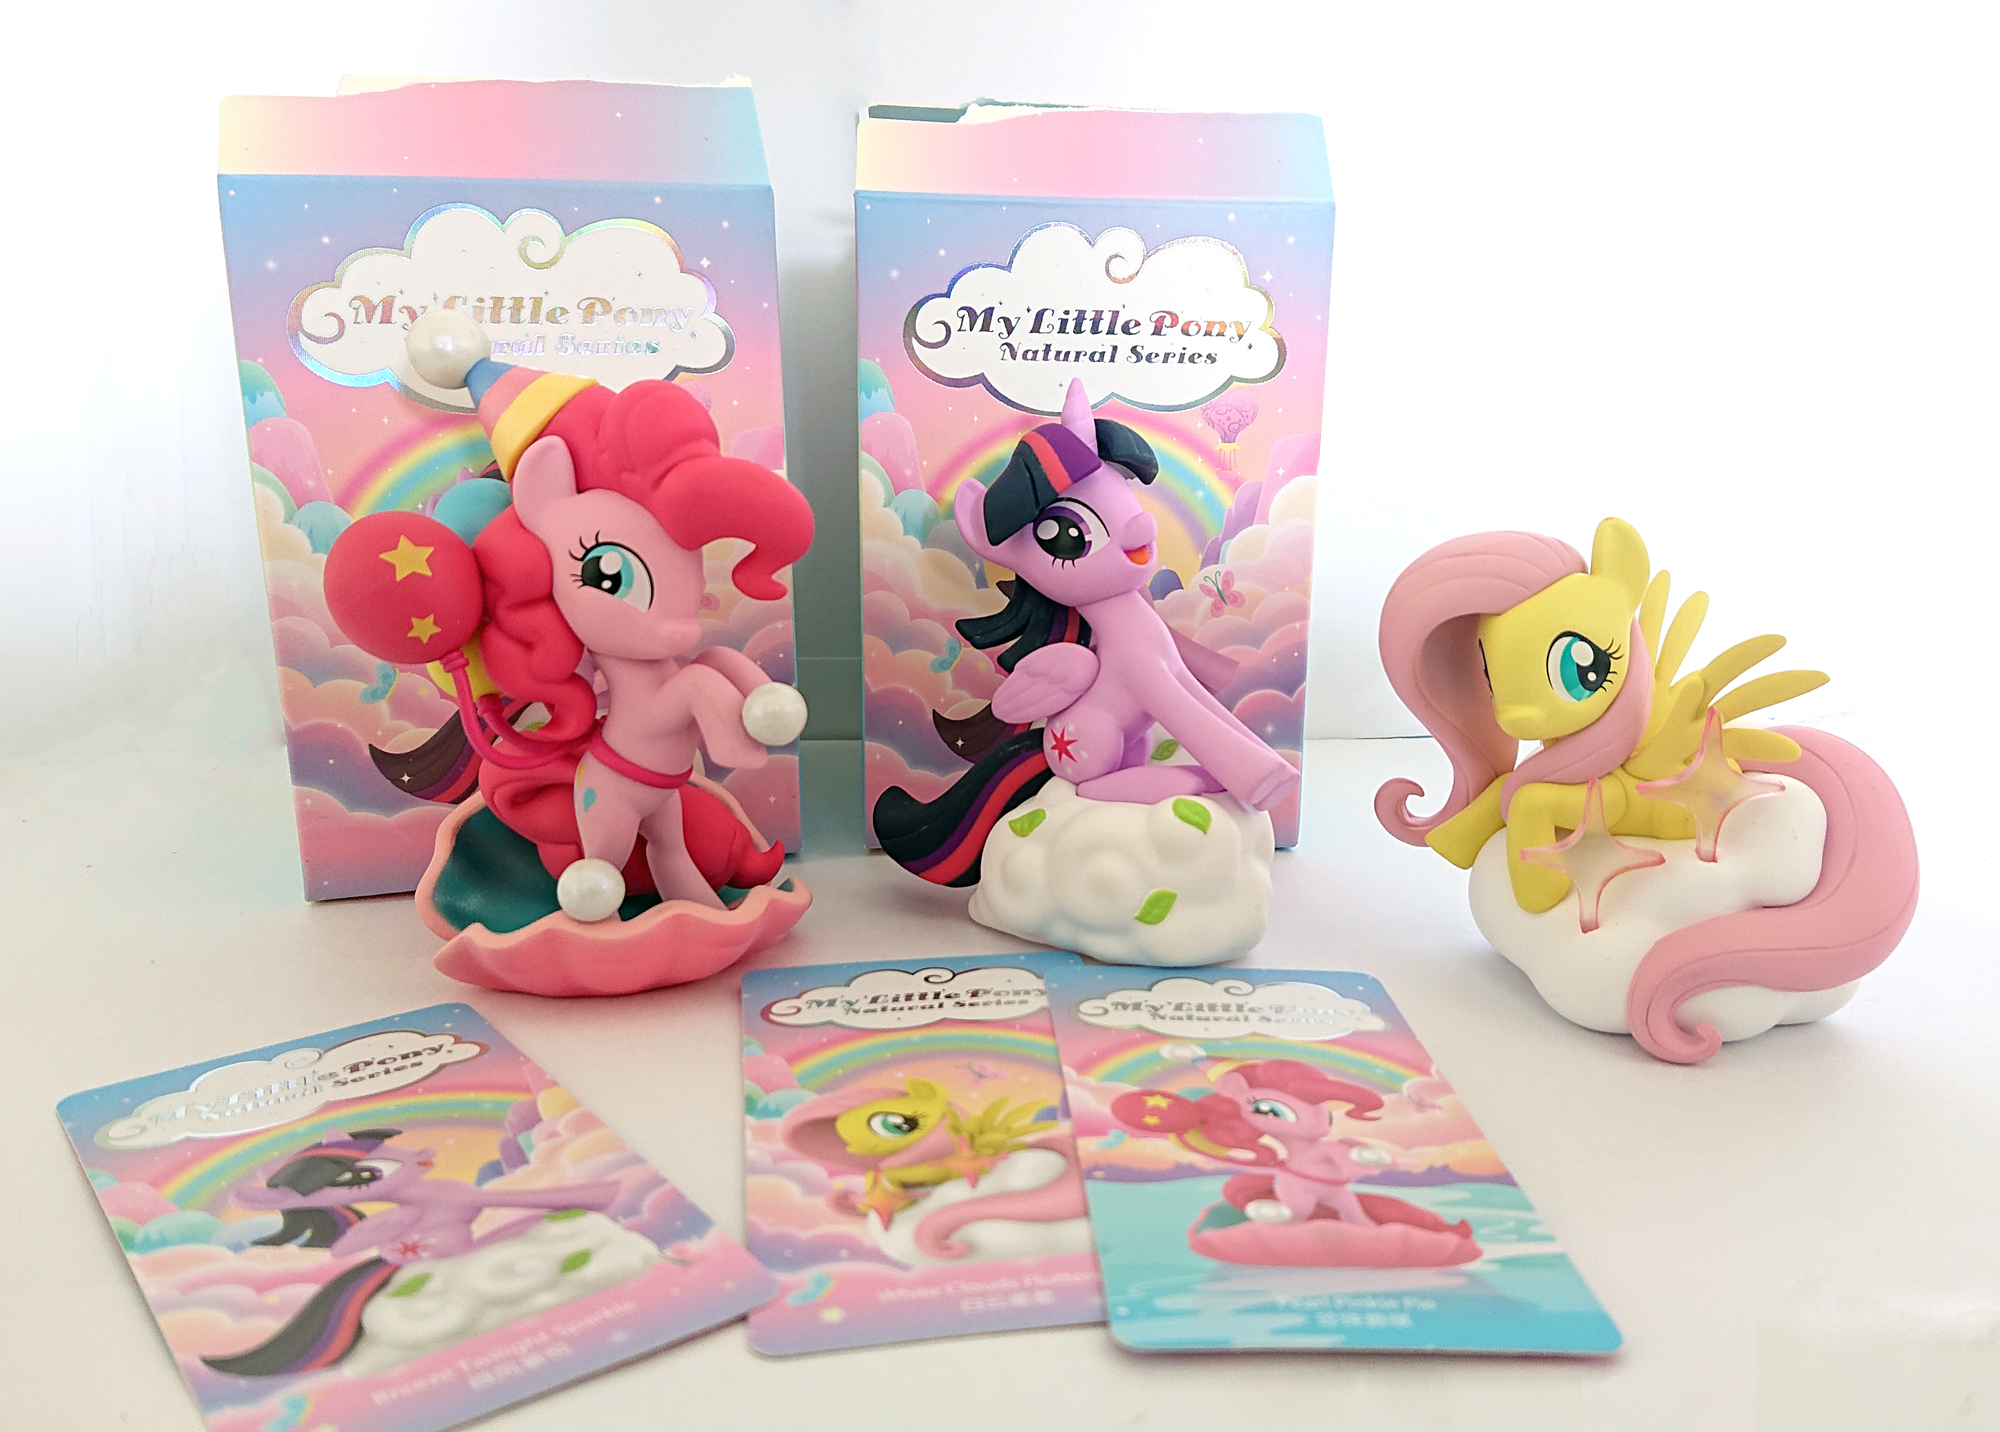 binaxx My Little Pony Action Figures, Anime Toy Statue 22cm PVC Pinkie Pie  Collection Model Decoration Ornaments Best Gift for Adults and Children :  Amazon.co.uk: Toys & Games